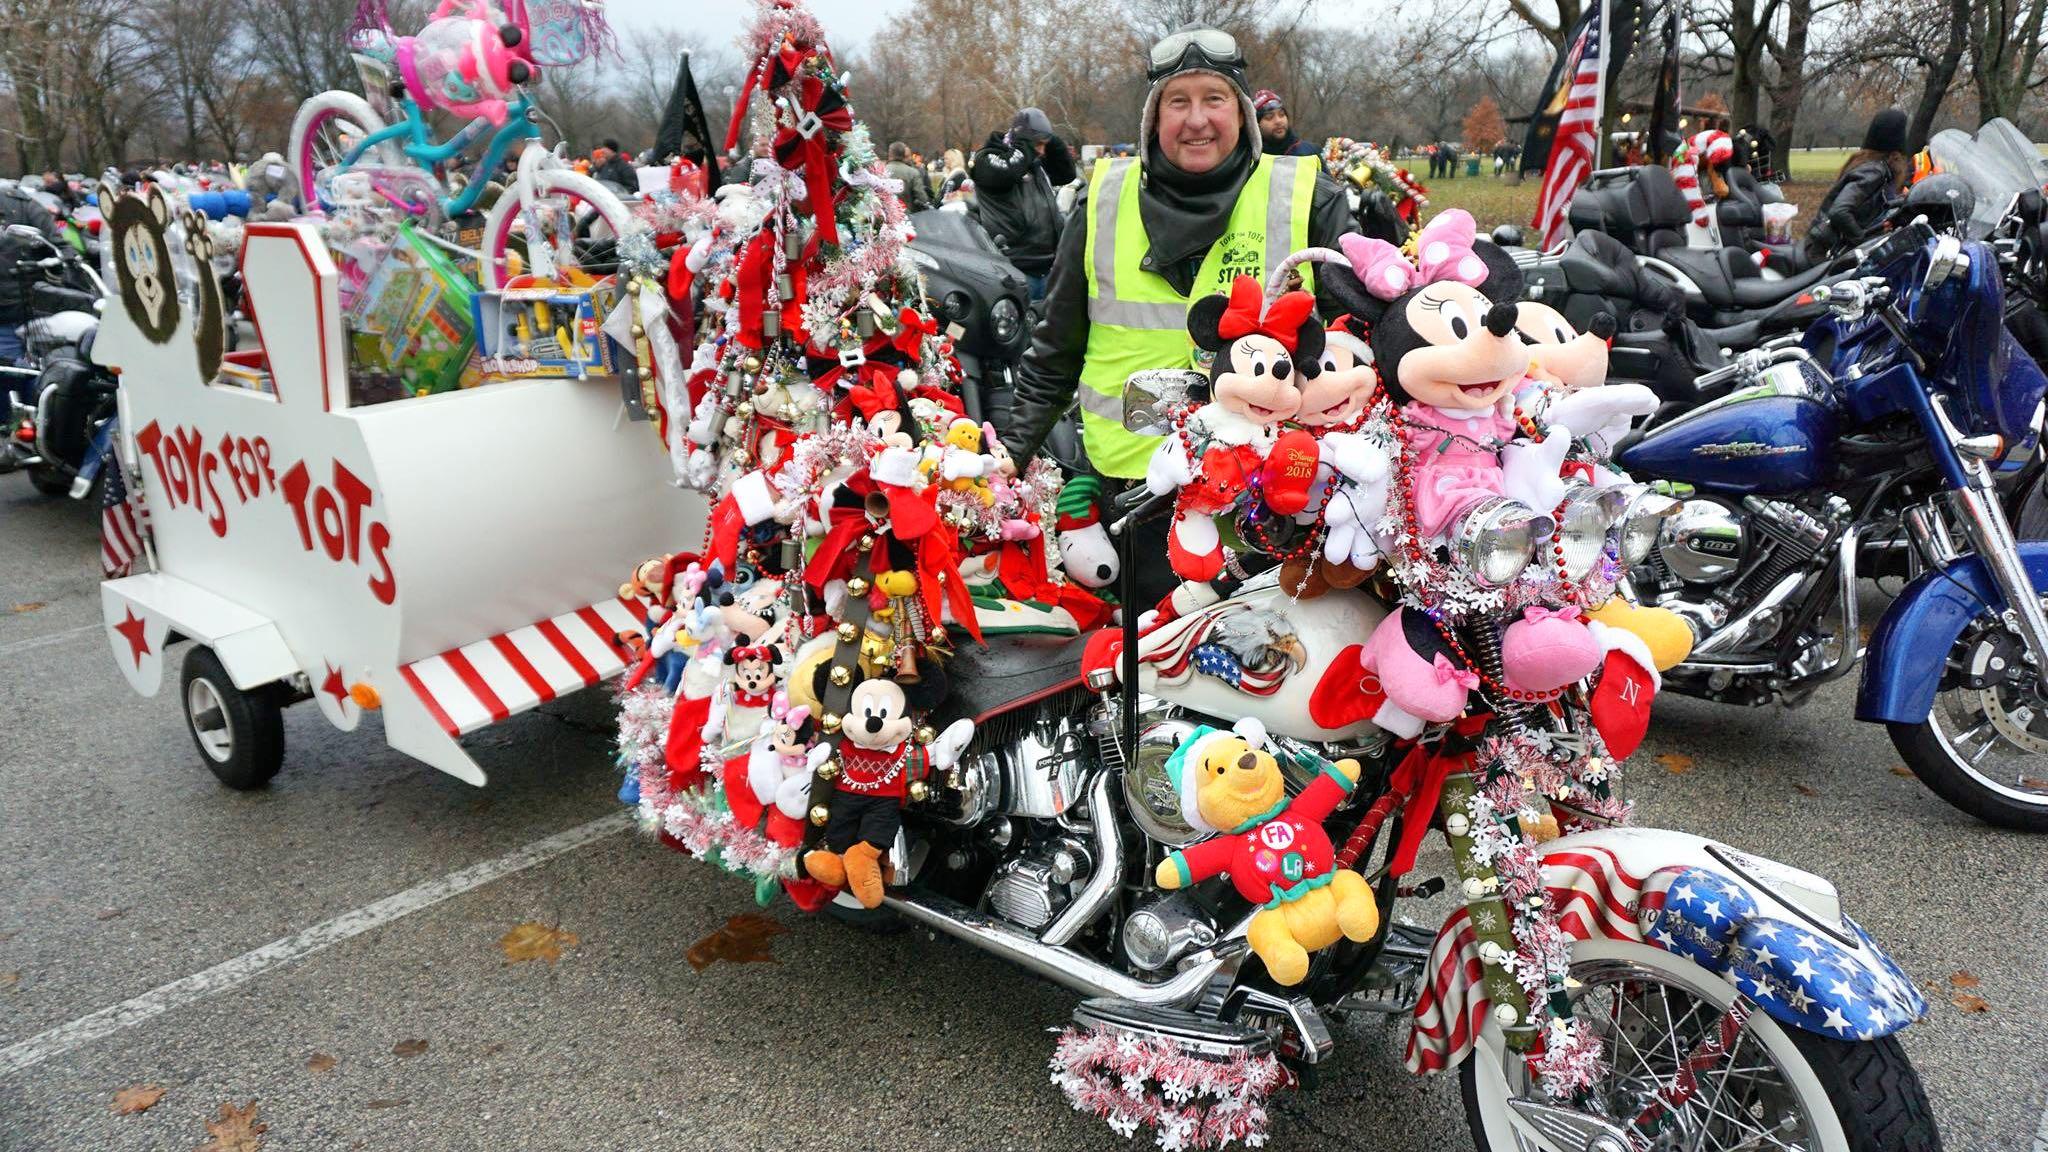 Tens of thousands of riders participate in the annual Toys for Tots Motorcycle Parade. (Chicagoland Toys for Tots Motorcycle Parade / Facebook)